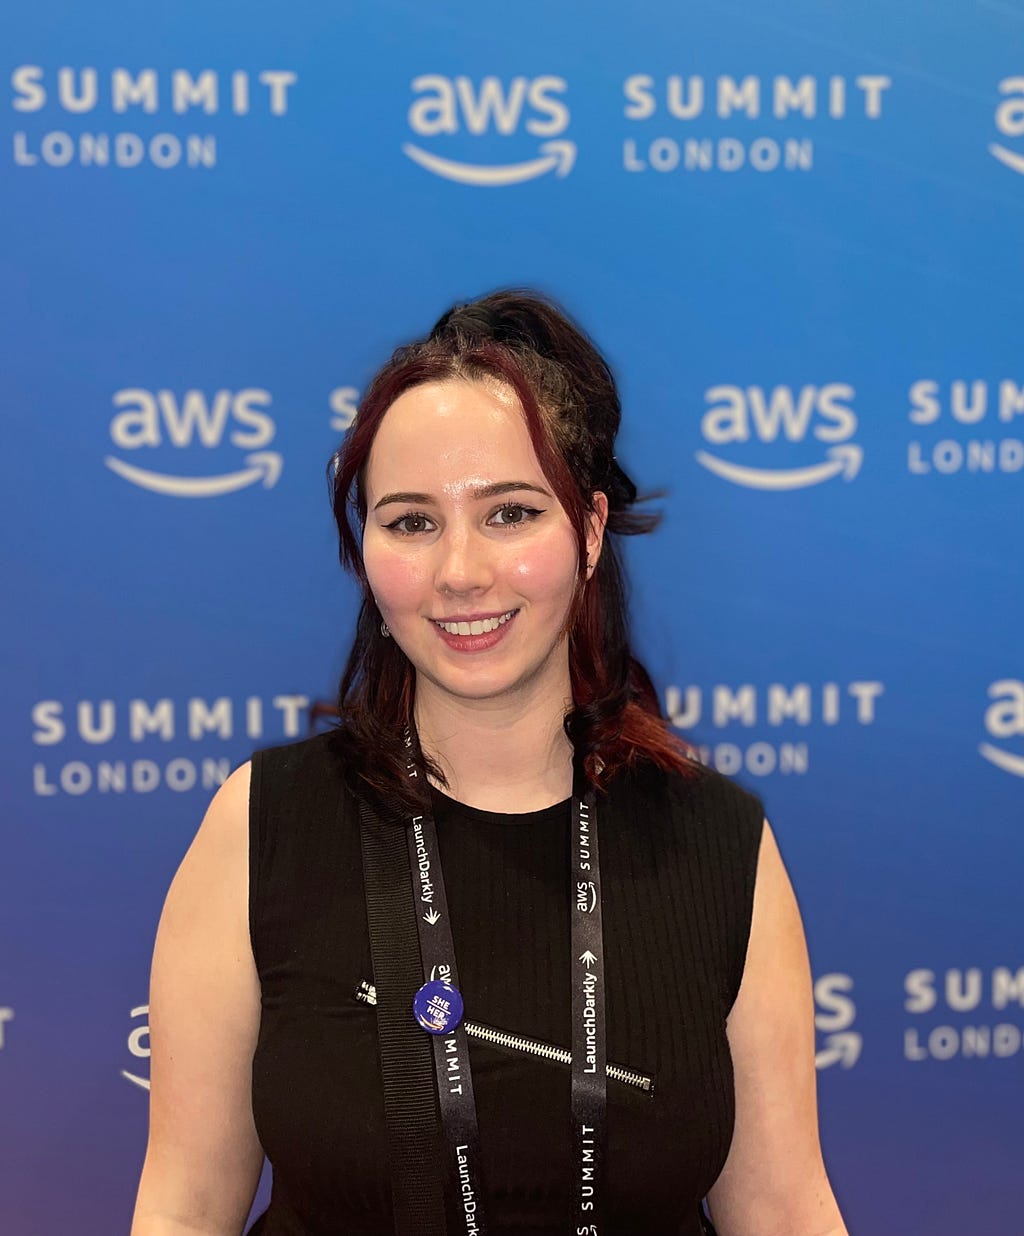 A photo of Orla Dunlop, DevOps graduate at the Department for Work and Pensions at AWS Summit in London.